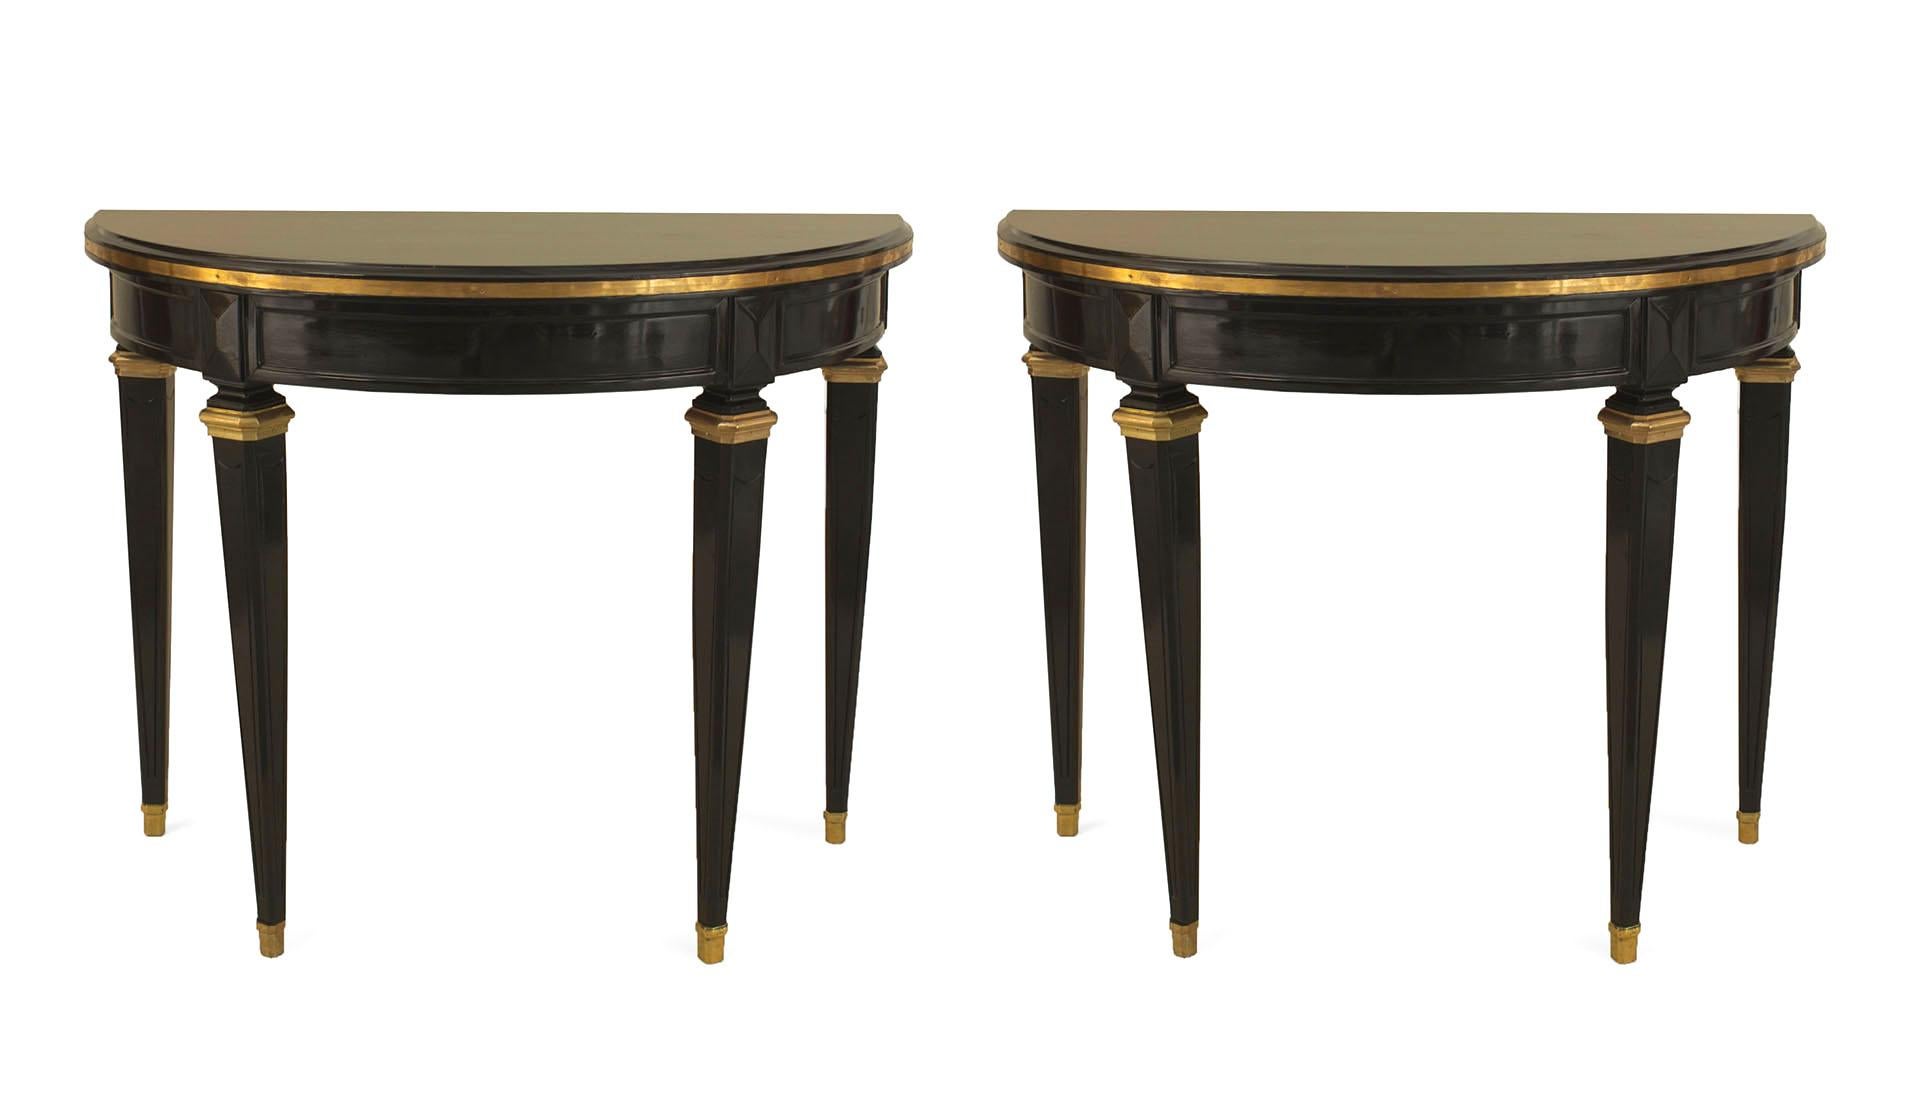 Pair of French Louis XVI-style (1940s) ebonized demilune shaped console tables with bronze trim and resting on 4 square tapered legs. (Attributed to JANSEN) (PRICED AS Pair)
